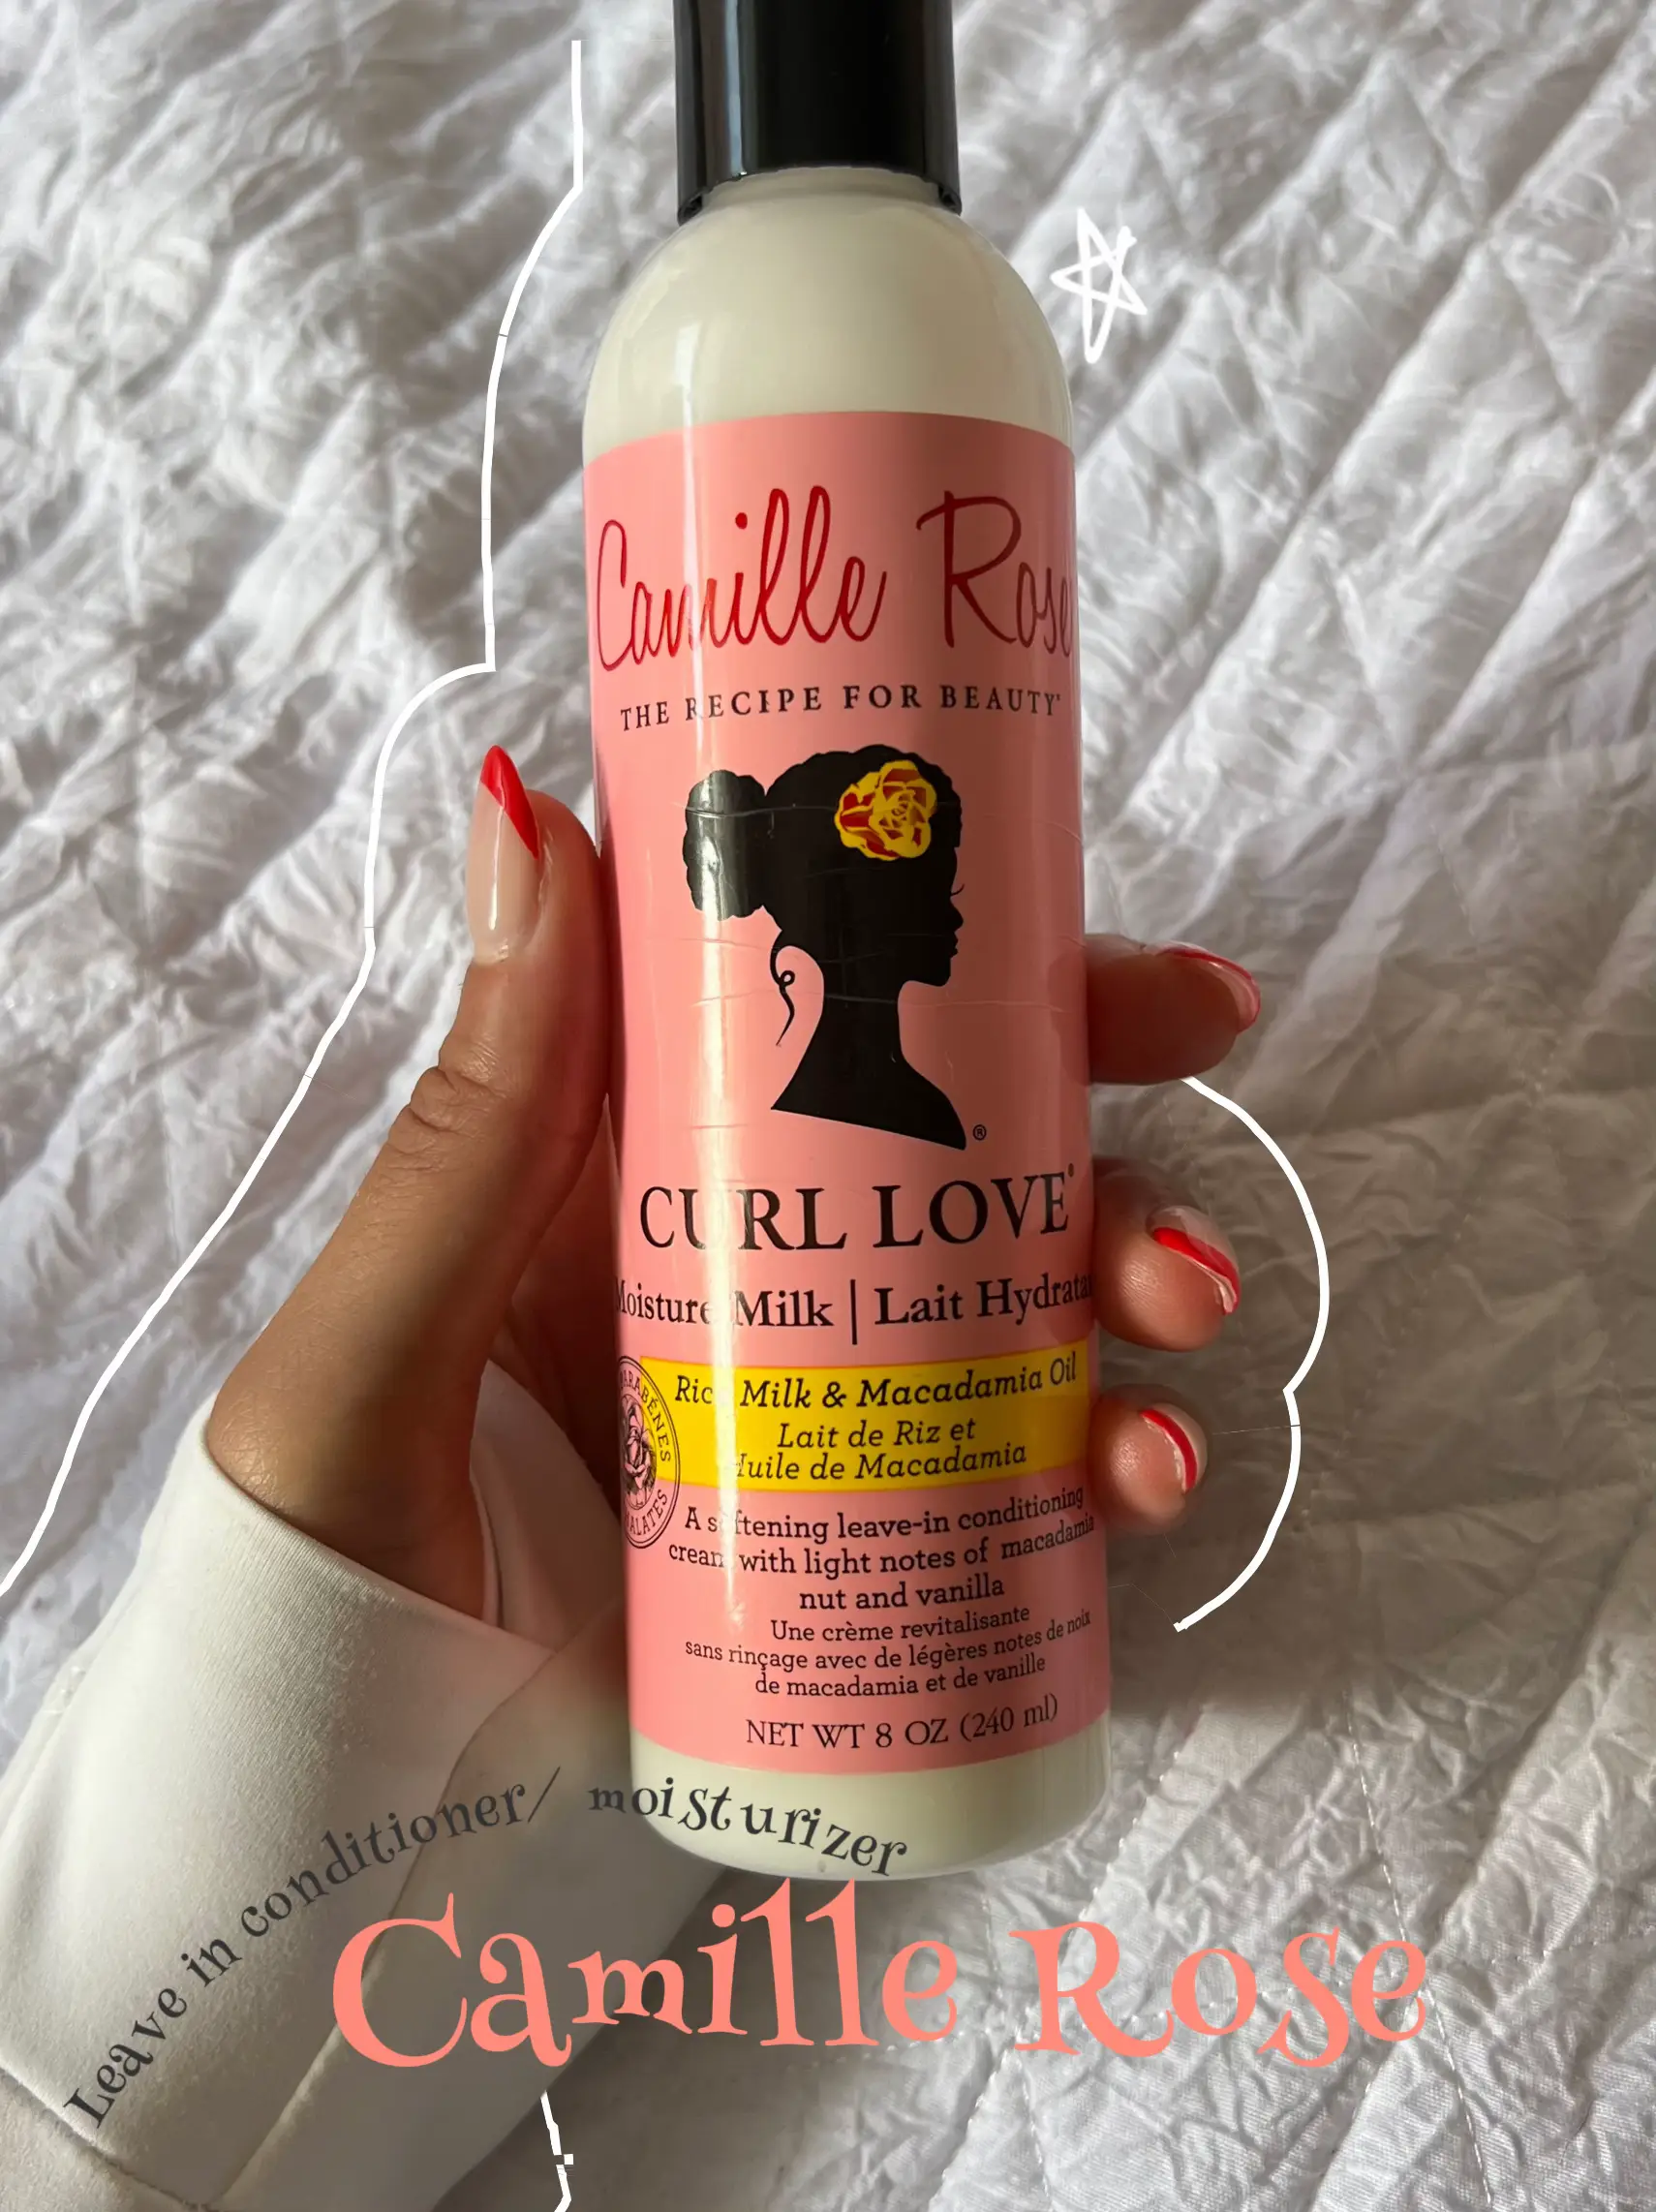 Mielle Organics Pom Honey Curl Smoothie 12oz – For the Culture Beauty Supply